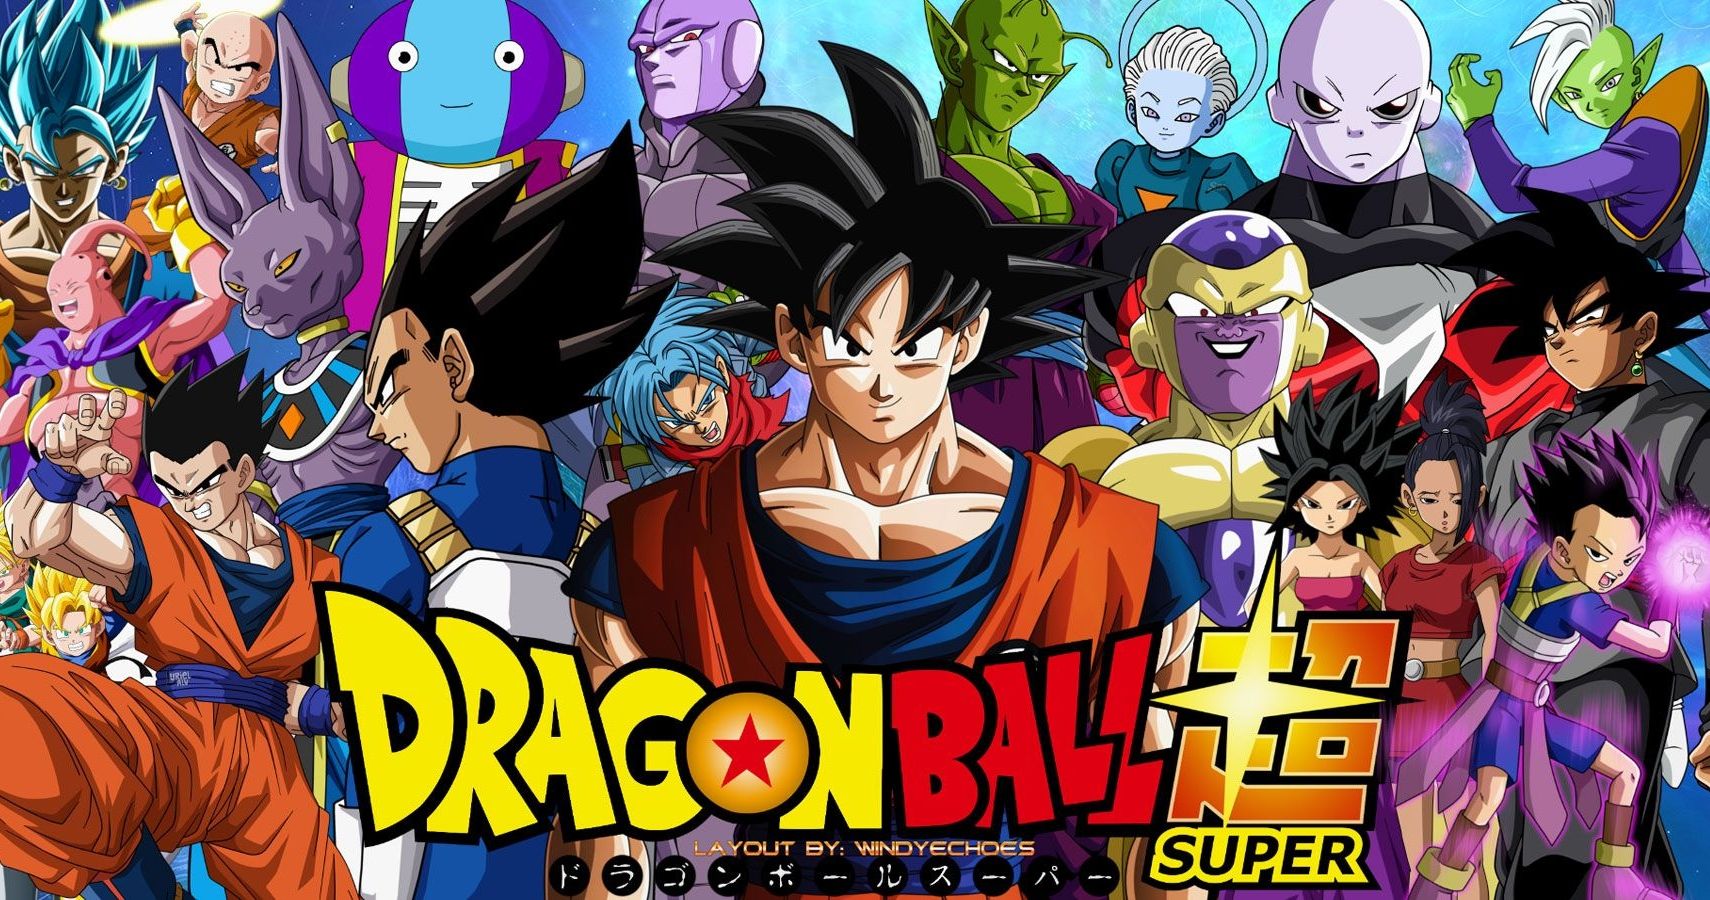 A New Dragon Ball Super Movie Confirmed For 2022